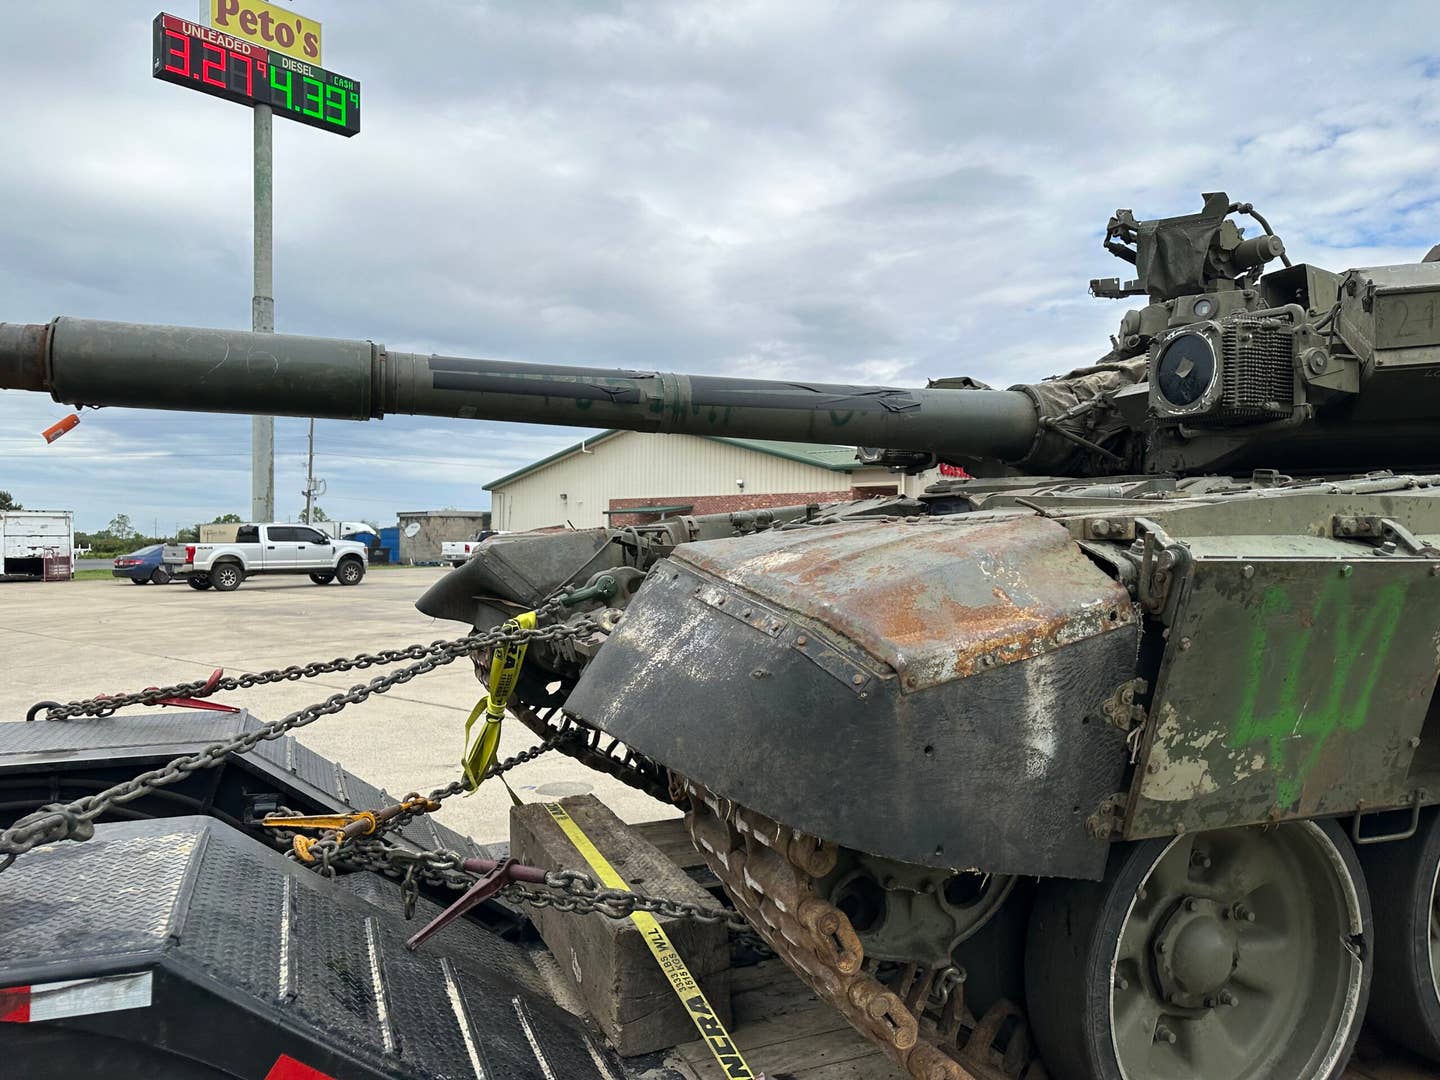 A Russian T-90A tank, apparently captured by Ukraine last fall, was left at a Louisiana truck stop after the truck hauling it broke down. (Courtesy of Reddit user Mutantlight)